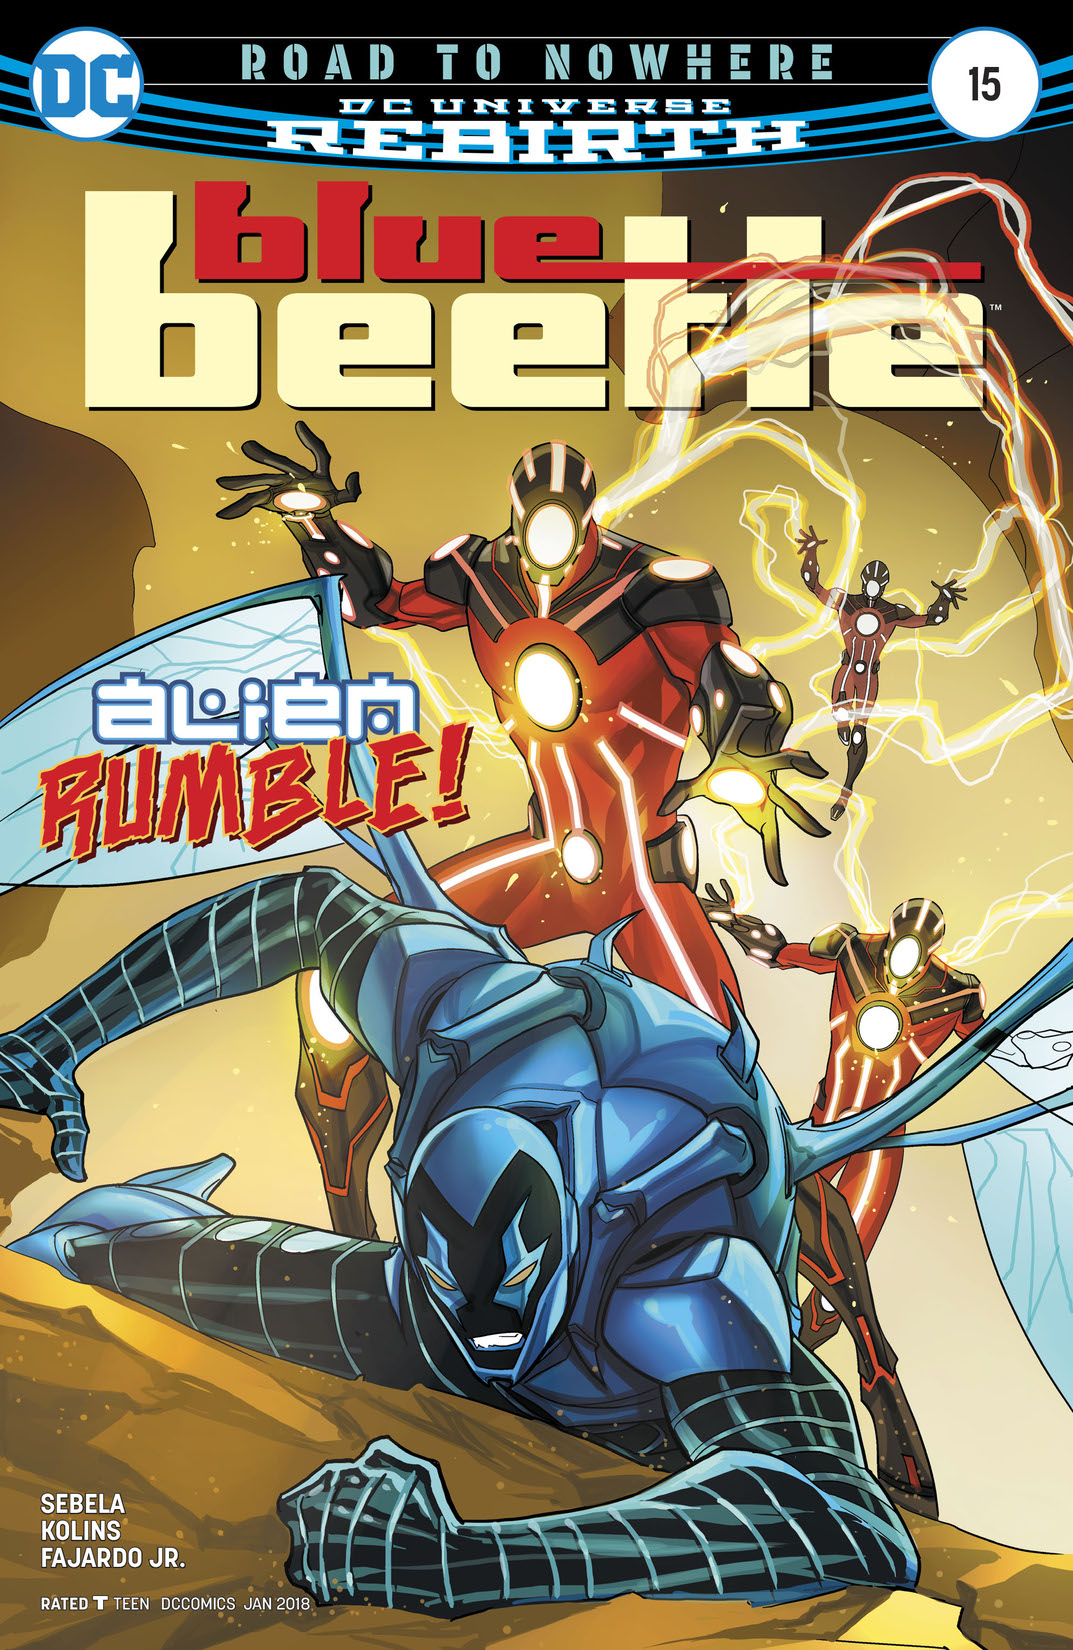 Blue Beetle (2016-) #15 preview images